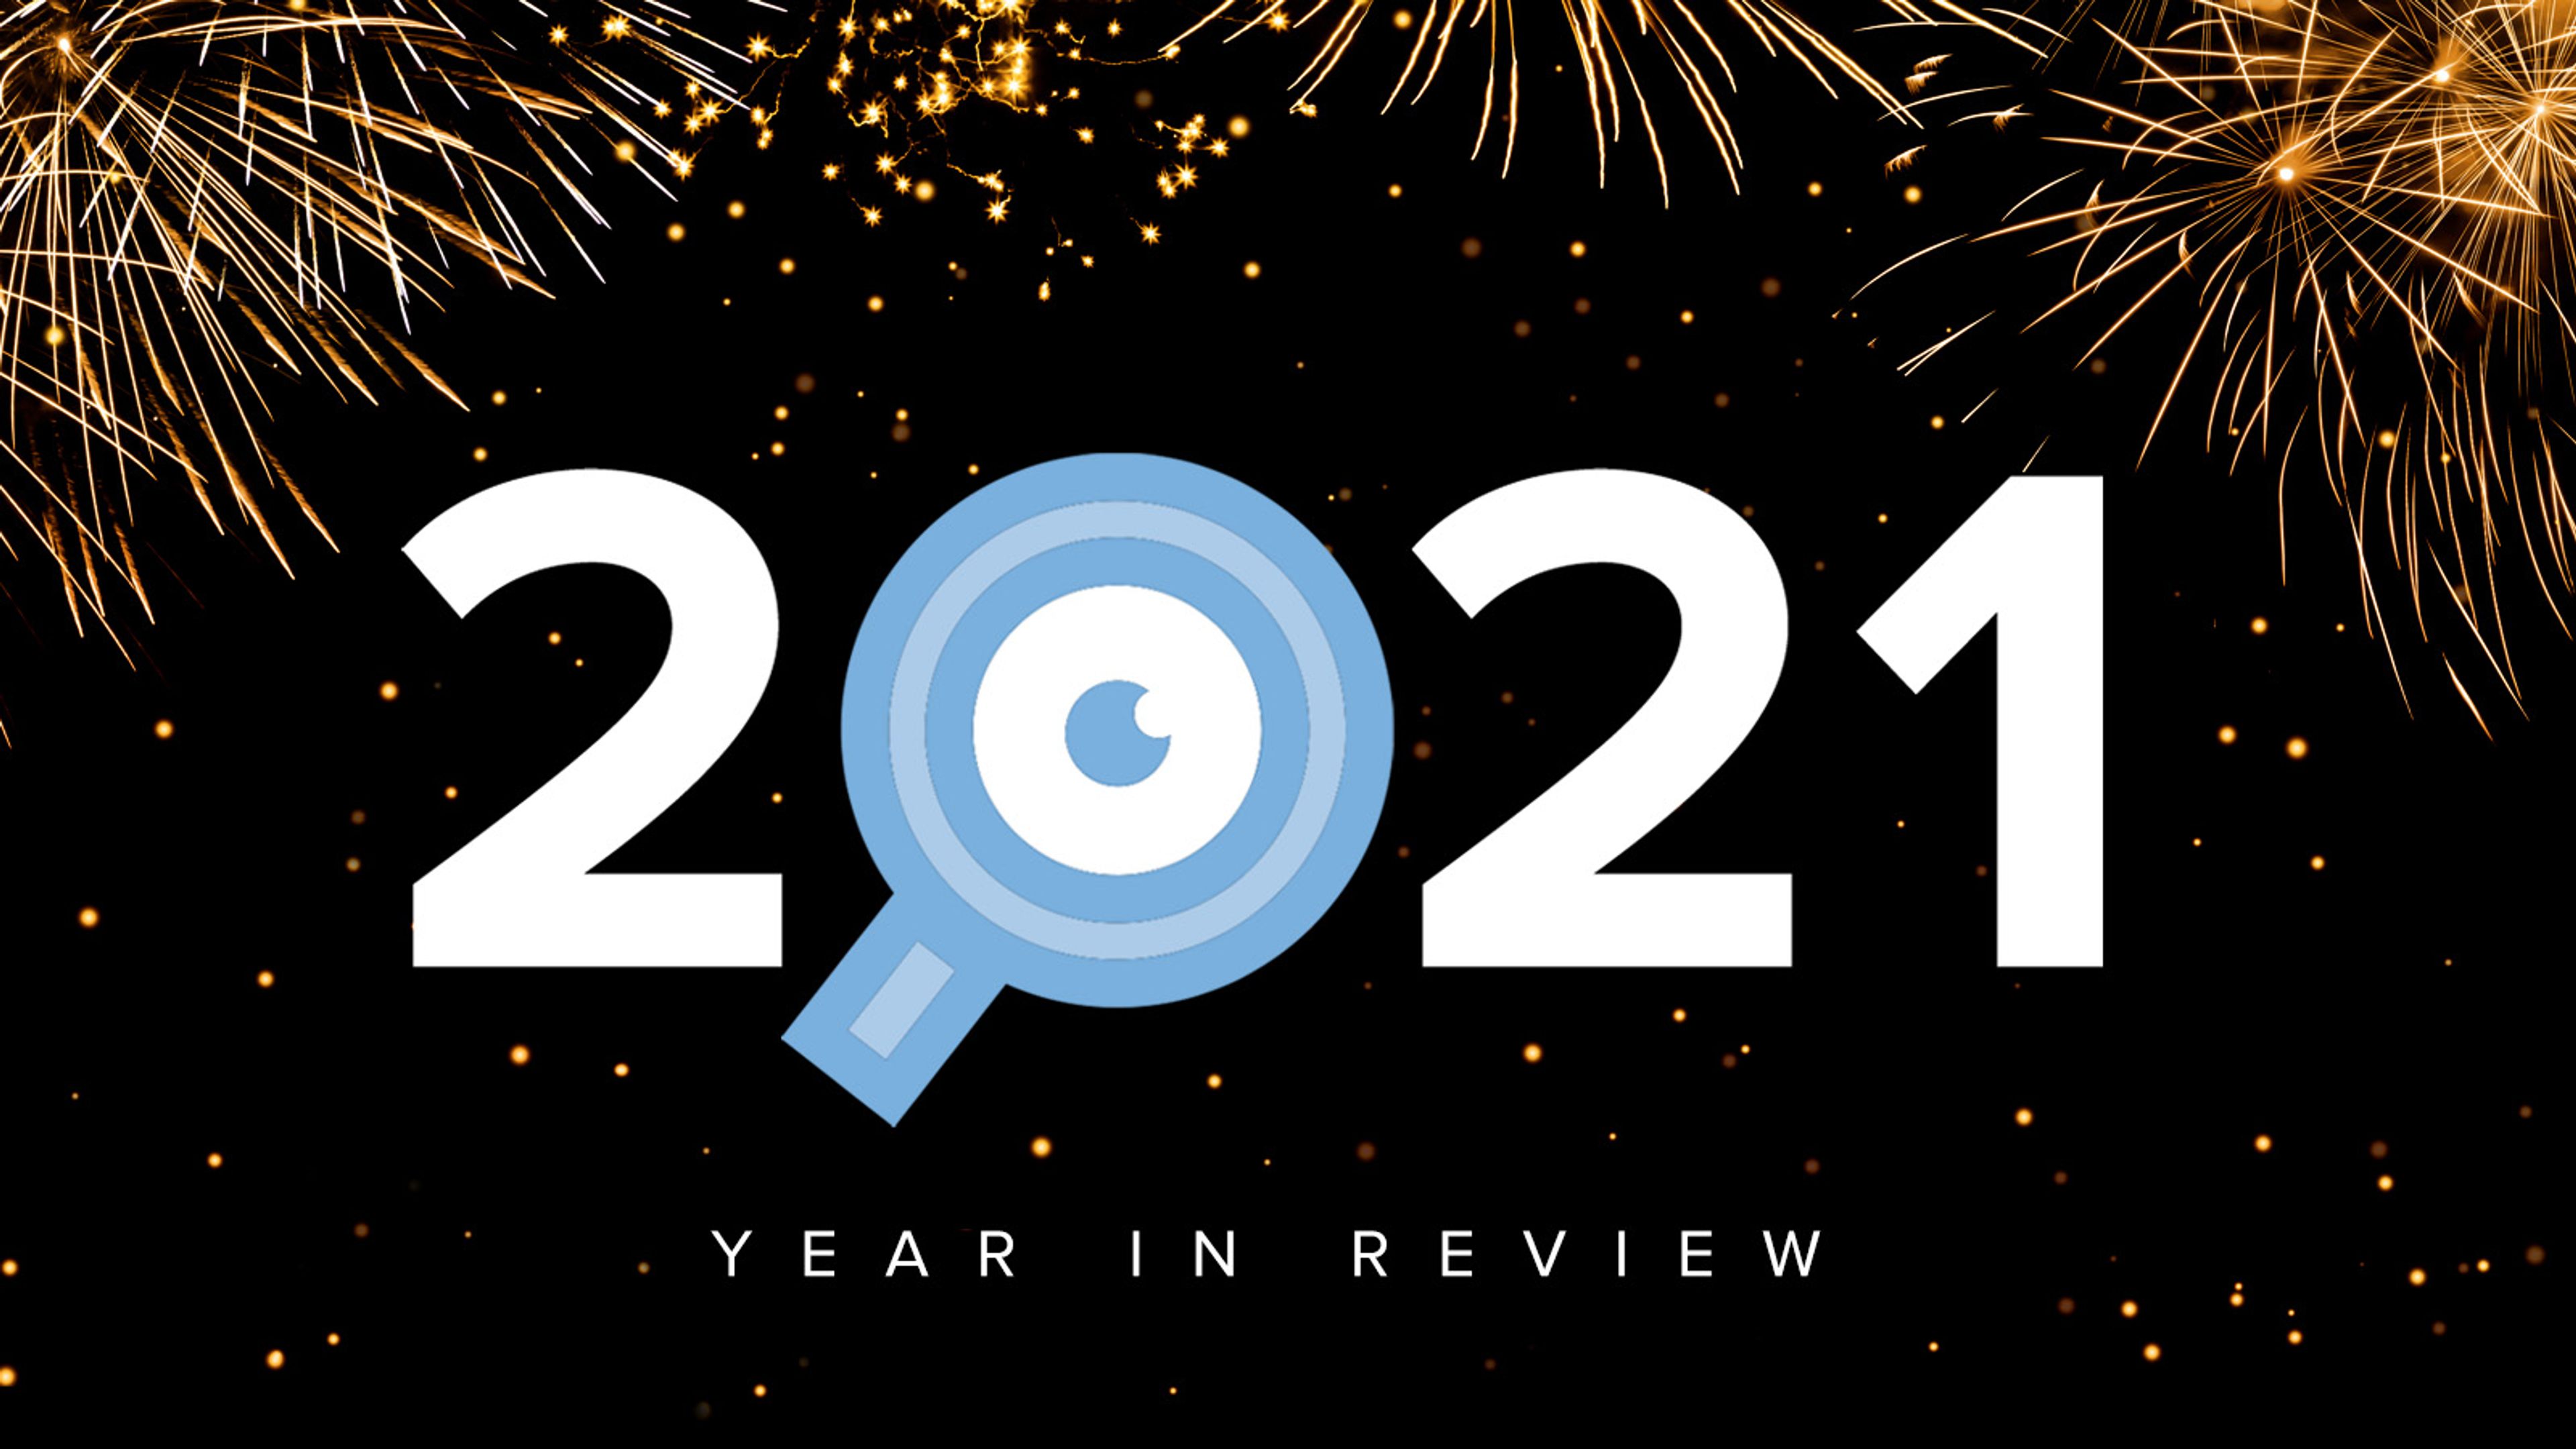 Image of 2021 with the CMS Critic magnifying glass logo icon replacing the zero in 2021 text, fireworks exploding in the background